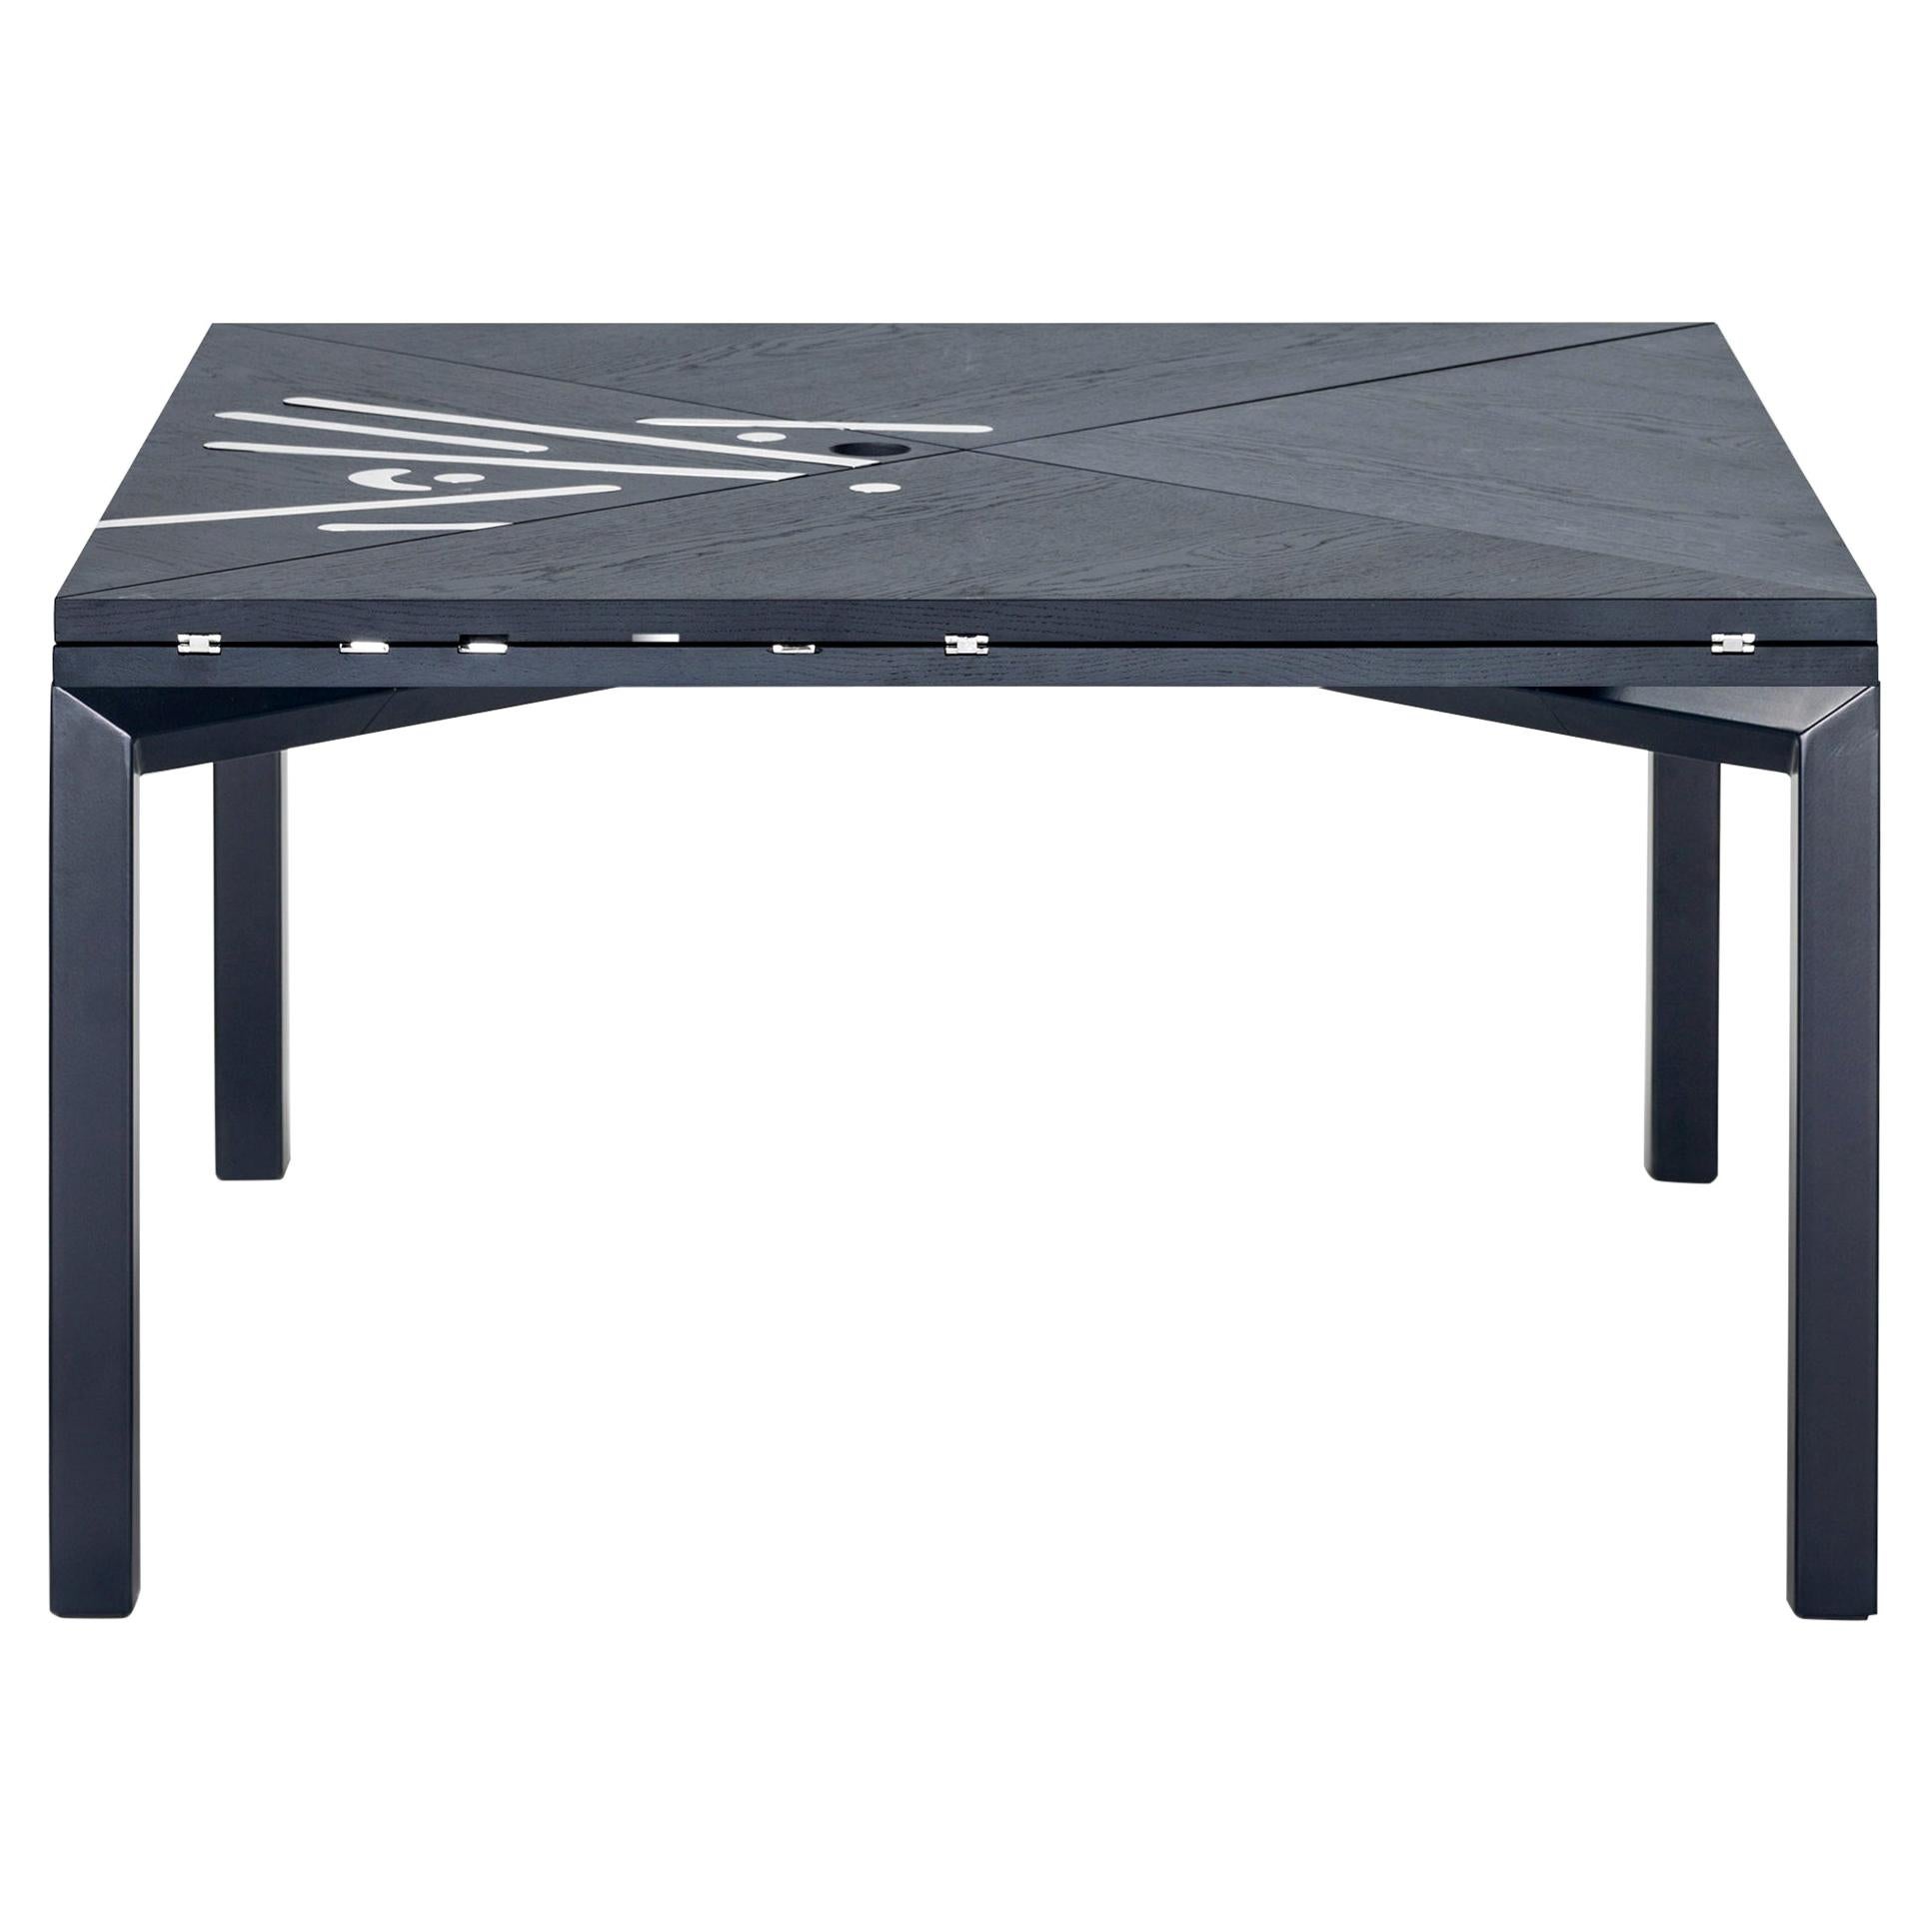 Limited Edition Alella Table by Lluís Clotet by BD For Sale